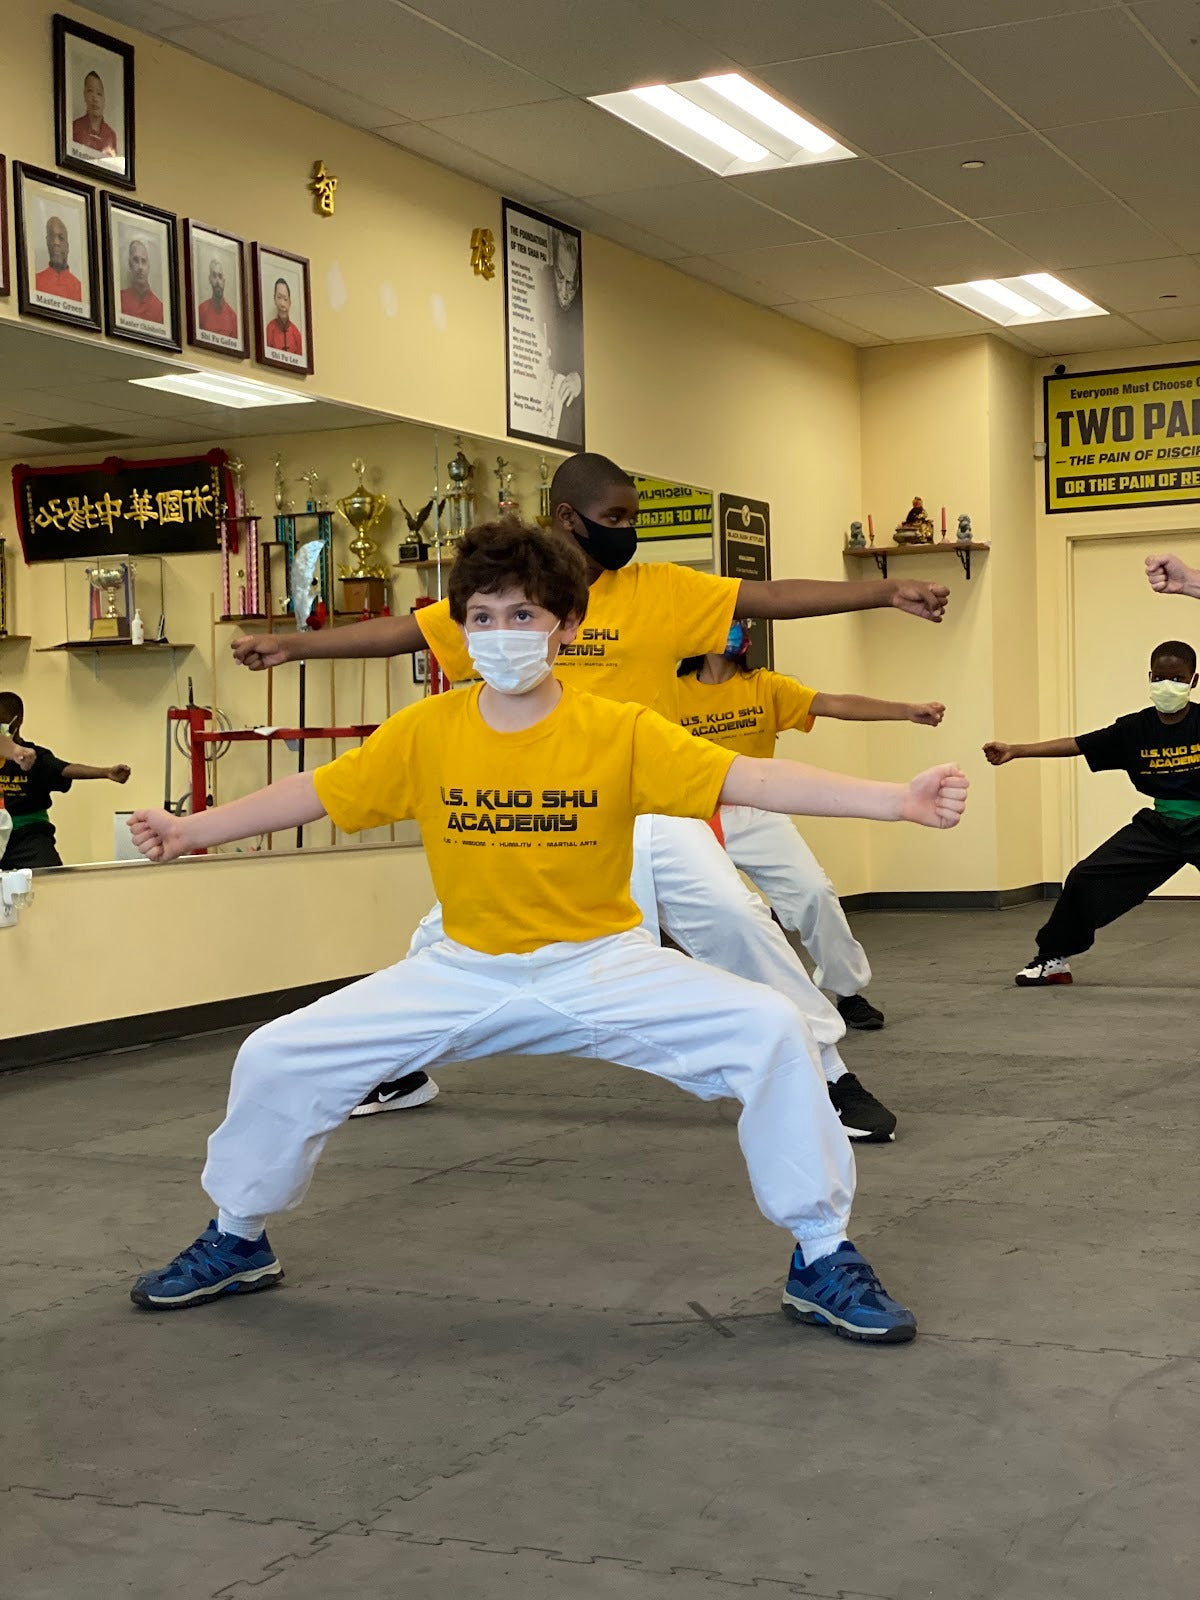 A FAMILY THAT KICKS TOGETHER STICKS TOGETHER: 5 REASONS TO JOIN A FAMILY MARTIAL ARTS PROGRAM